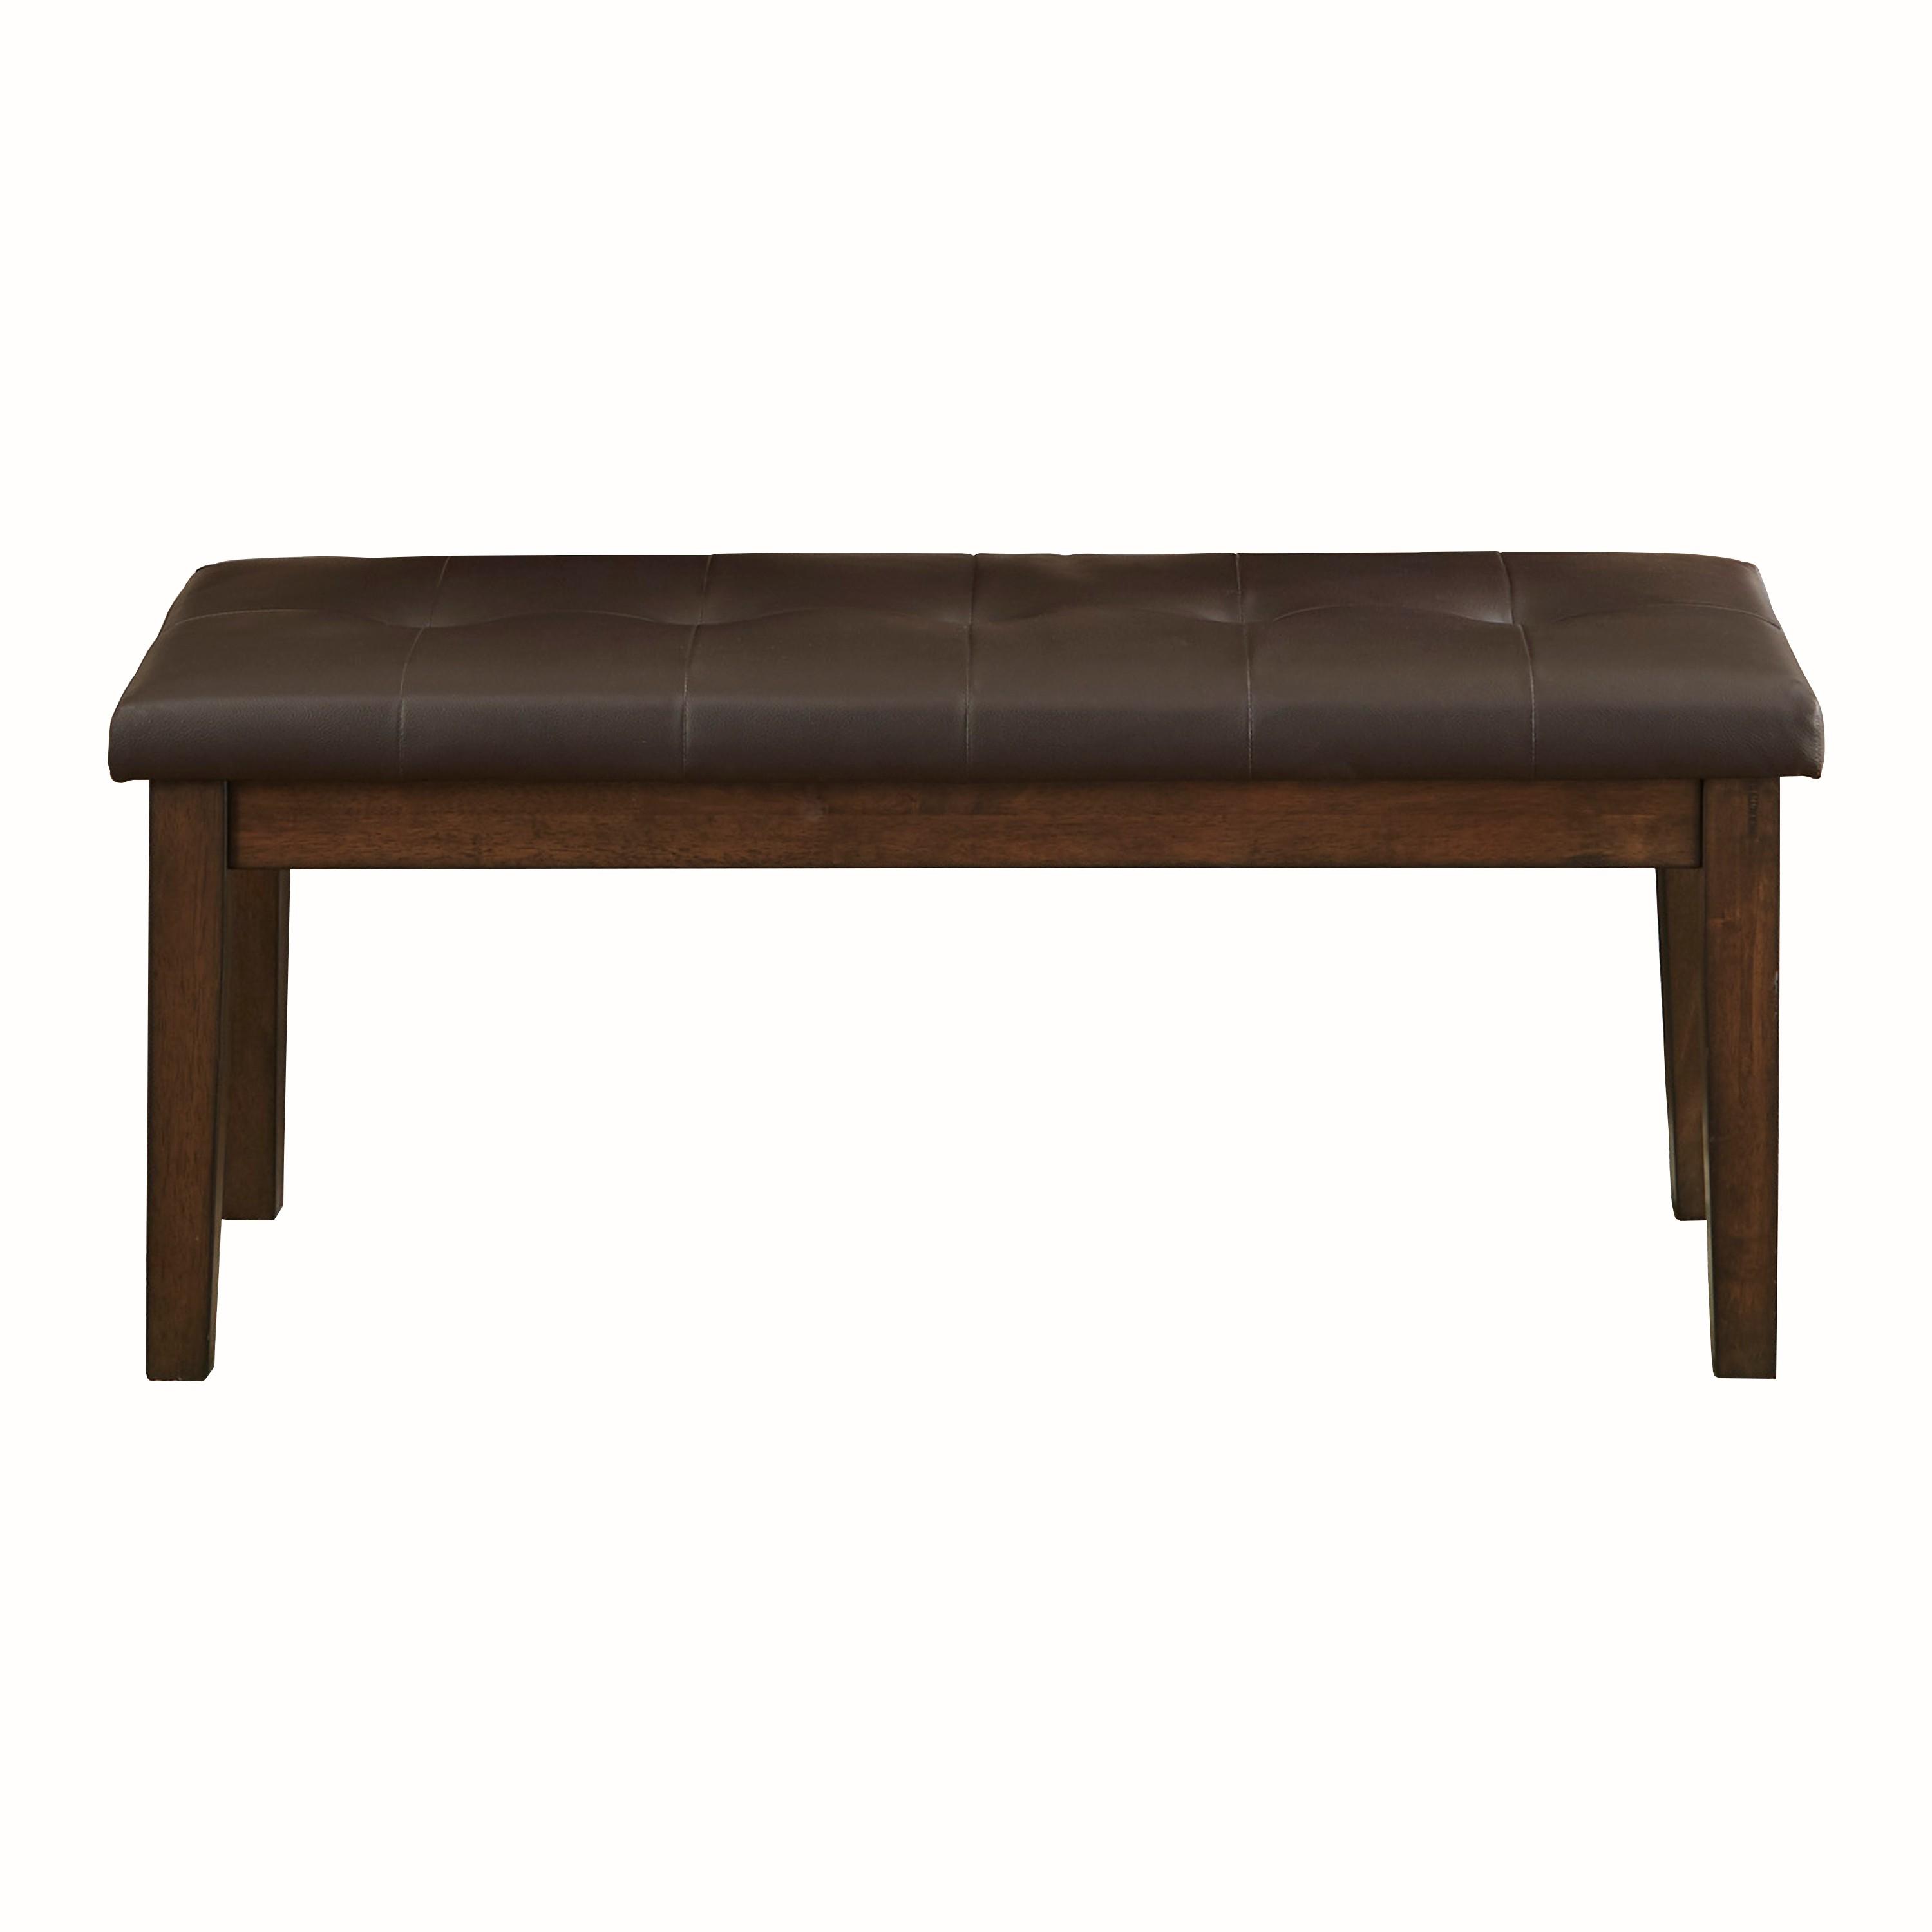 Transitional Bench 5614-13 Wieland 5614-13 in Rustic Brown Polyester